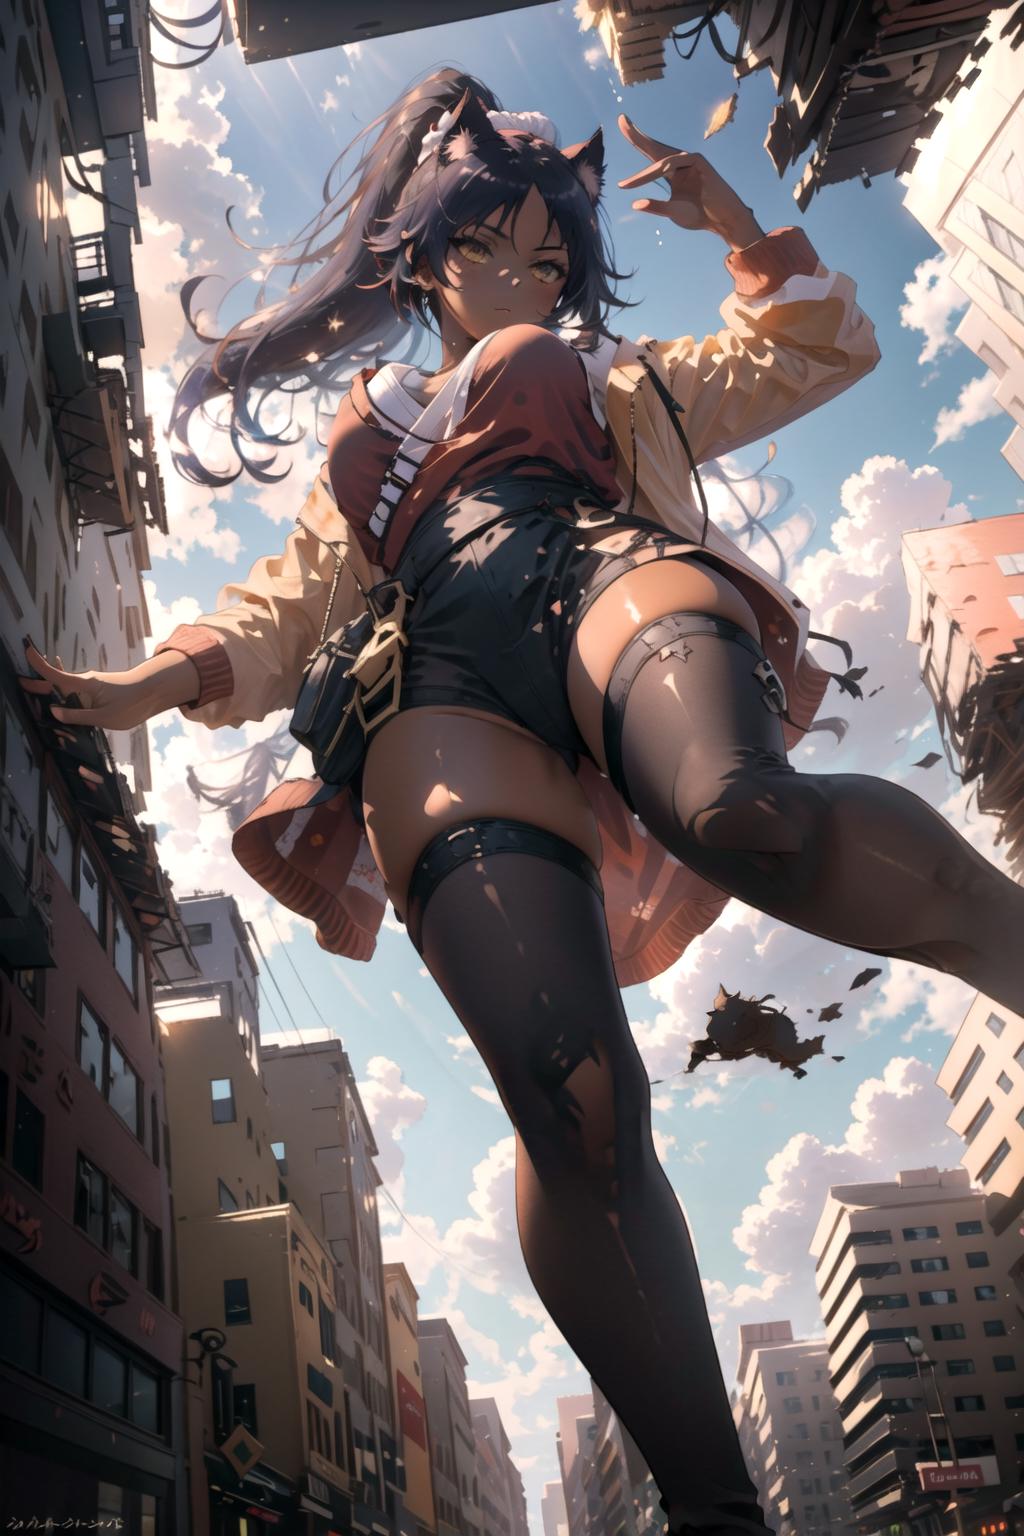 Giantess | Concept image by Meepsy